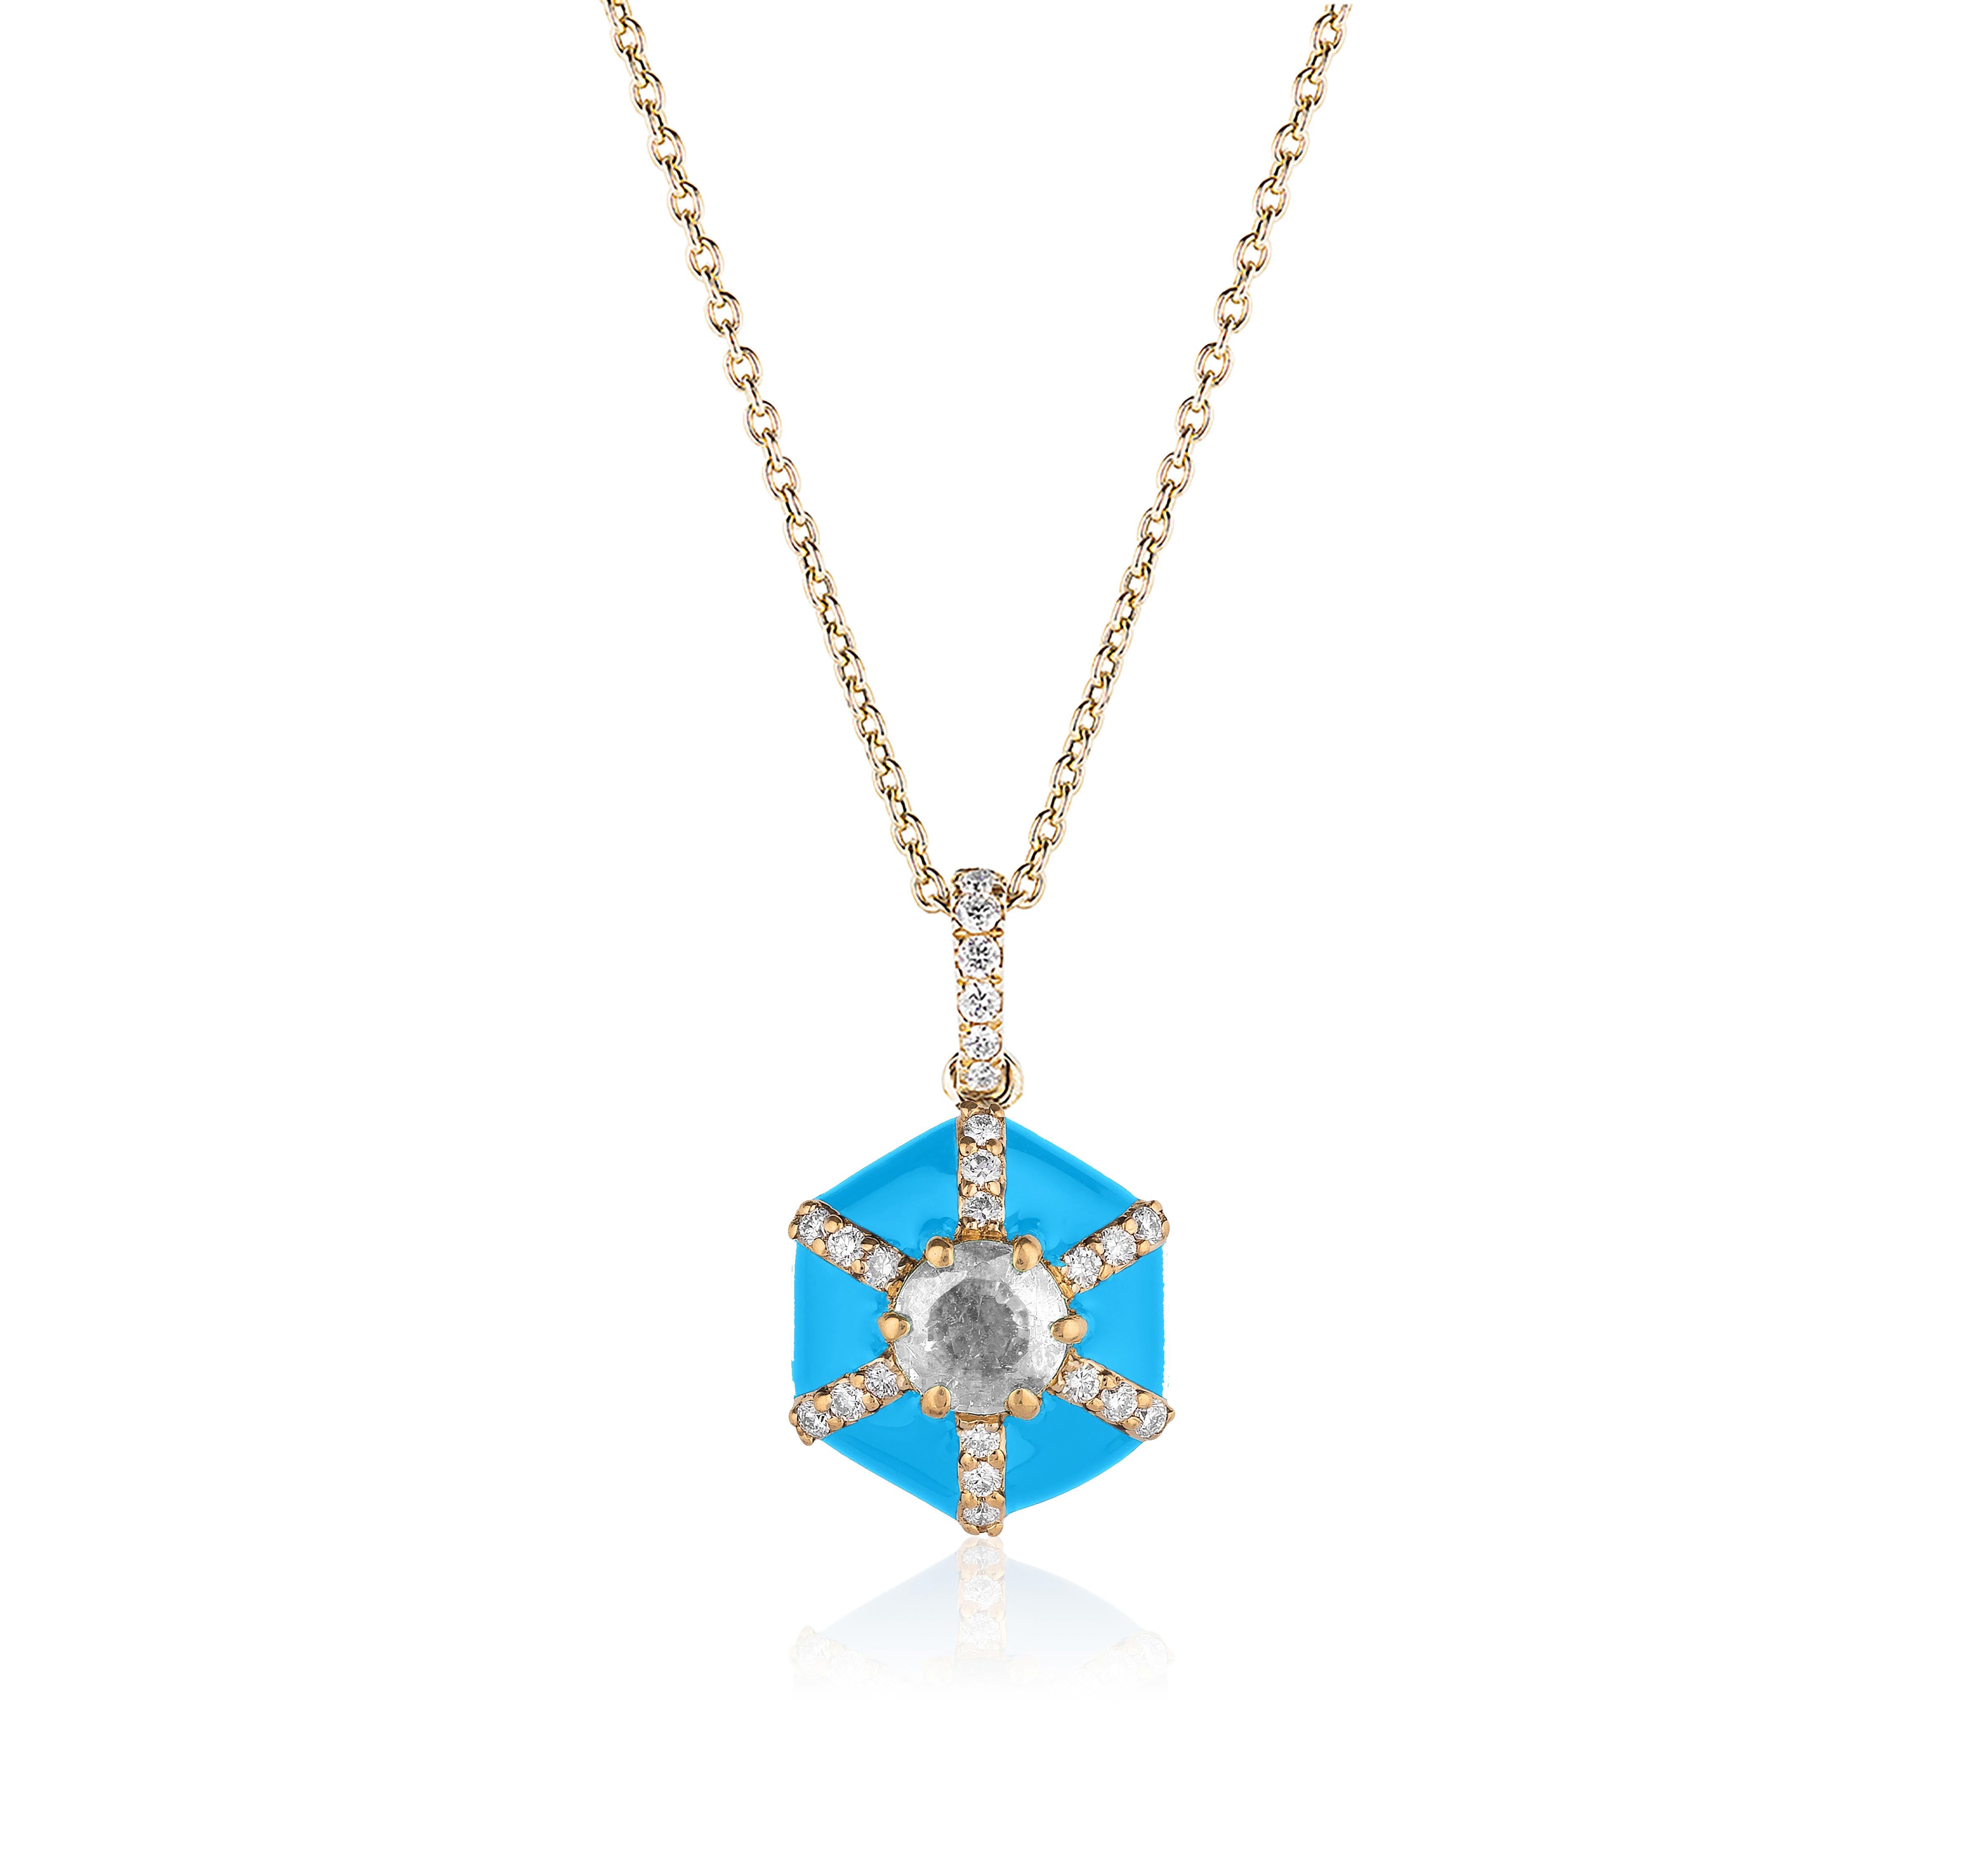 Hexagon Turquoise Enamel Pendant with  Diamonds in 18K Yellow Gold. from ‘Queen’ Collection

Stone Size: 4 mm

Diamonds: G-H / VS, Approx. Wt: 0.10 Carats 